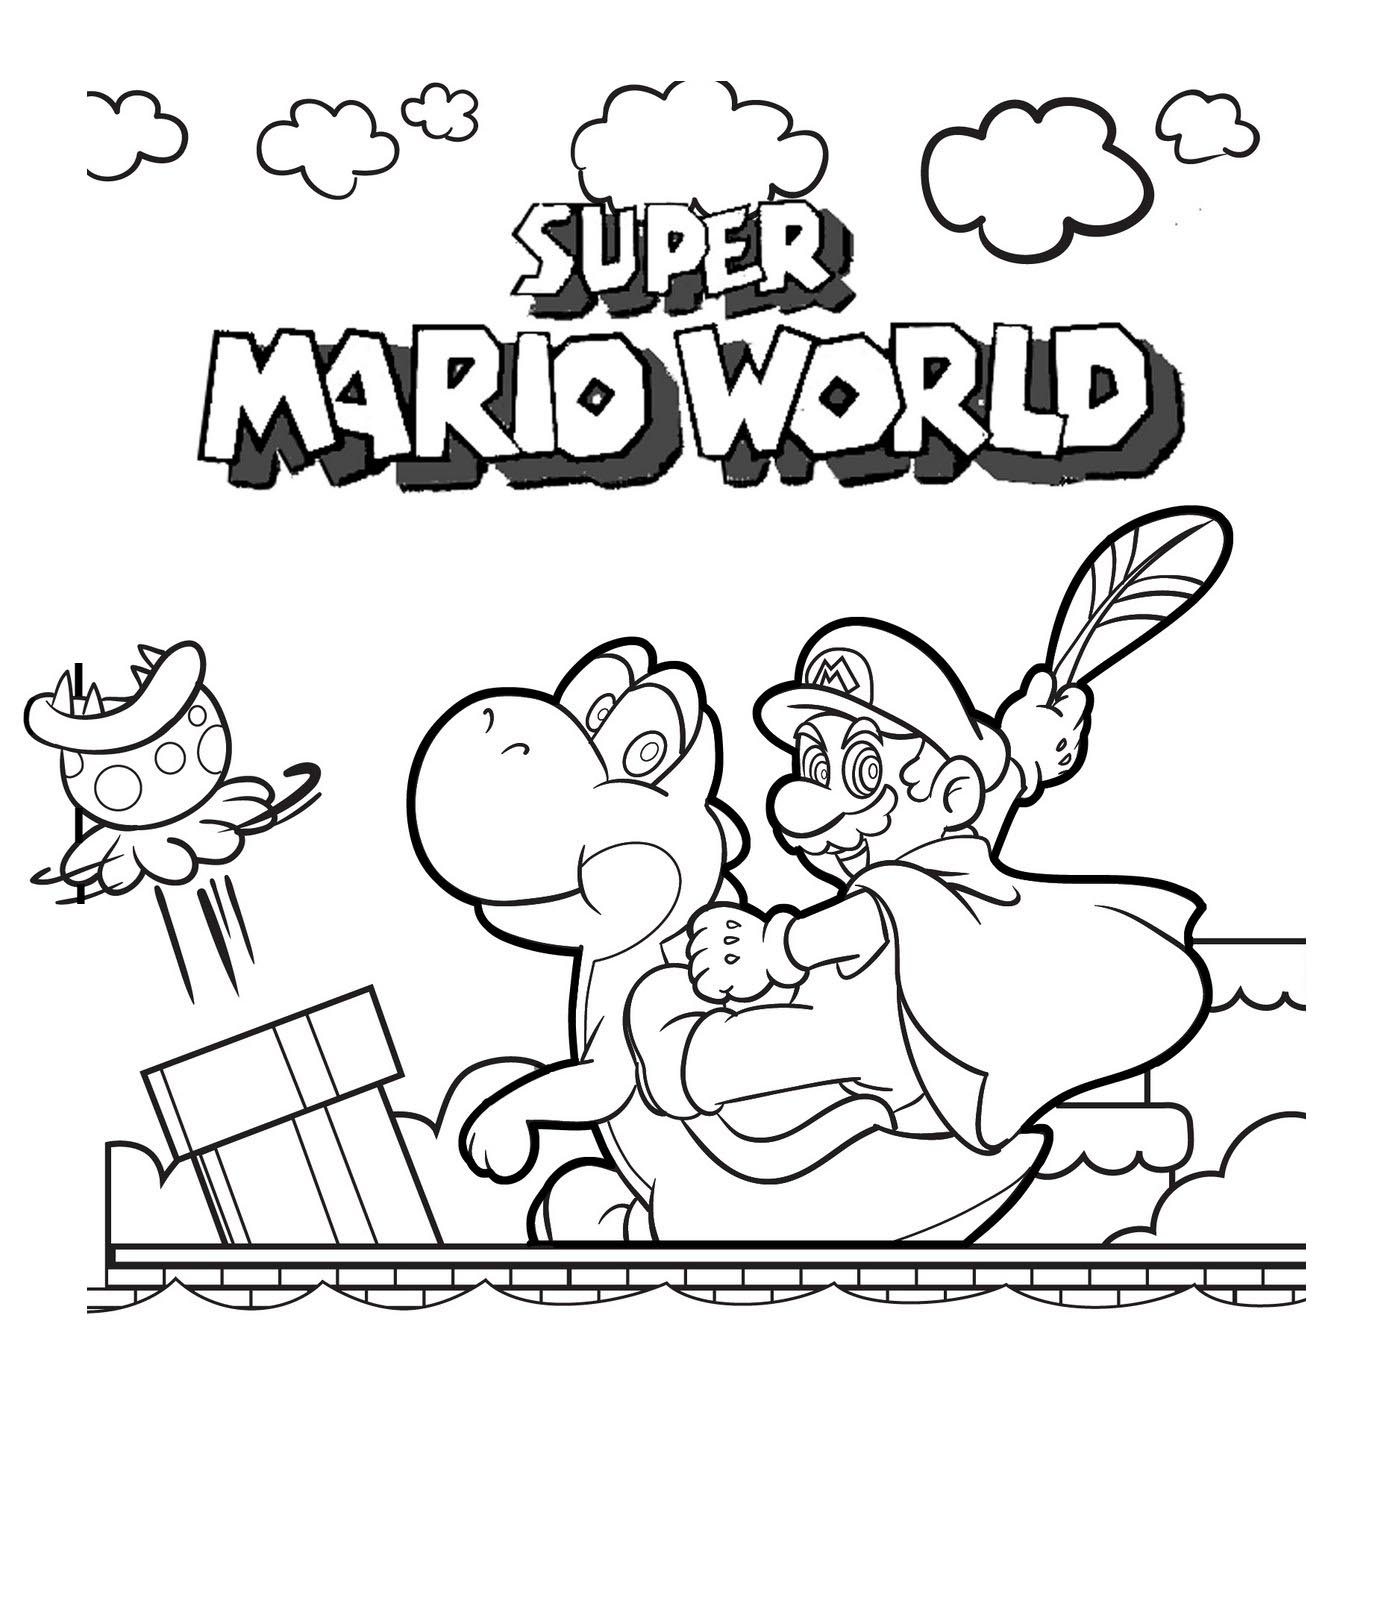  Mario coloring pages | color printing | coloring pages printable | coloring book pages | #24